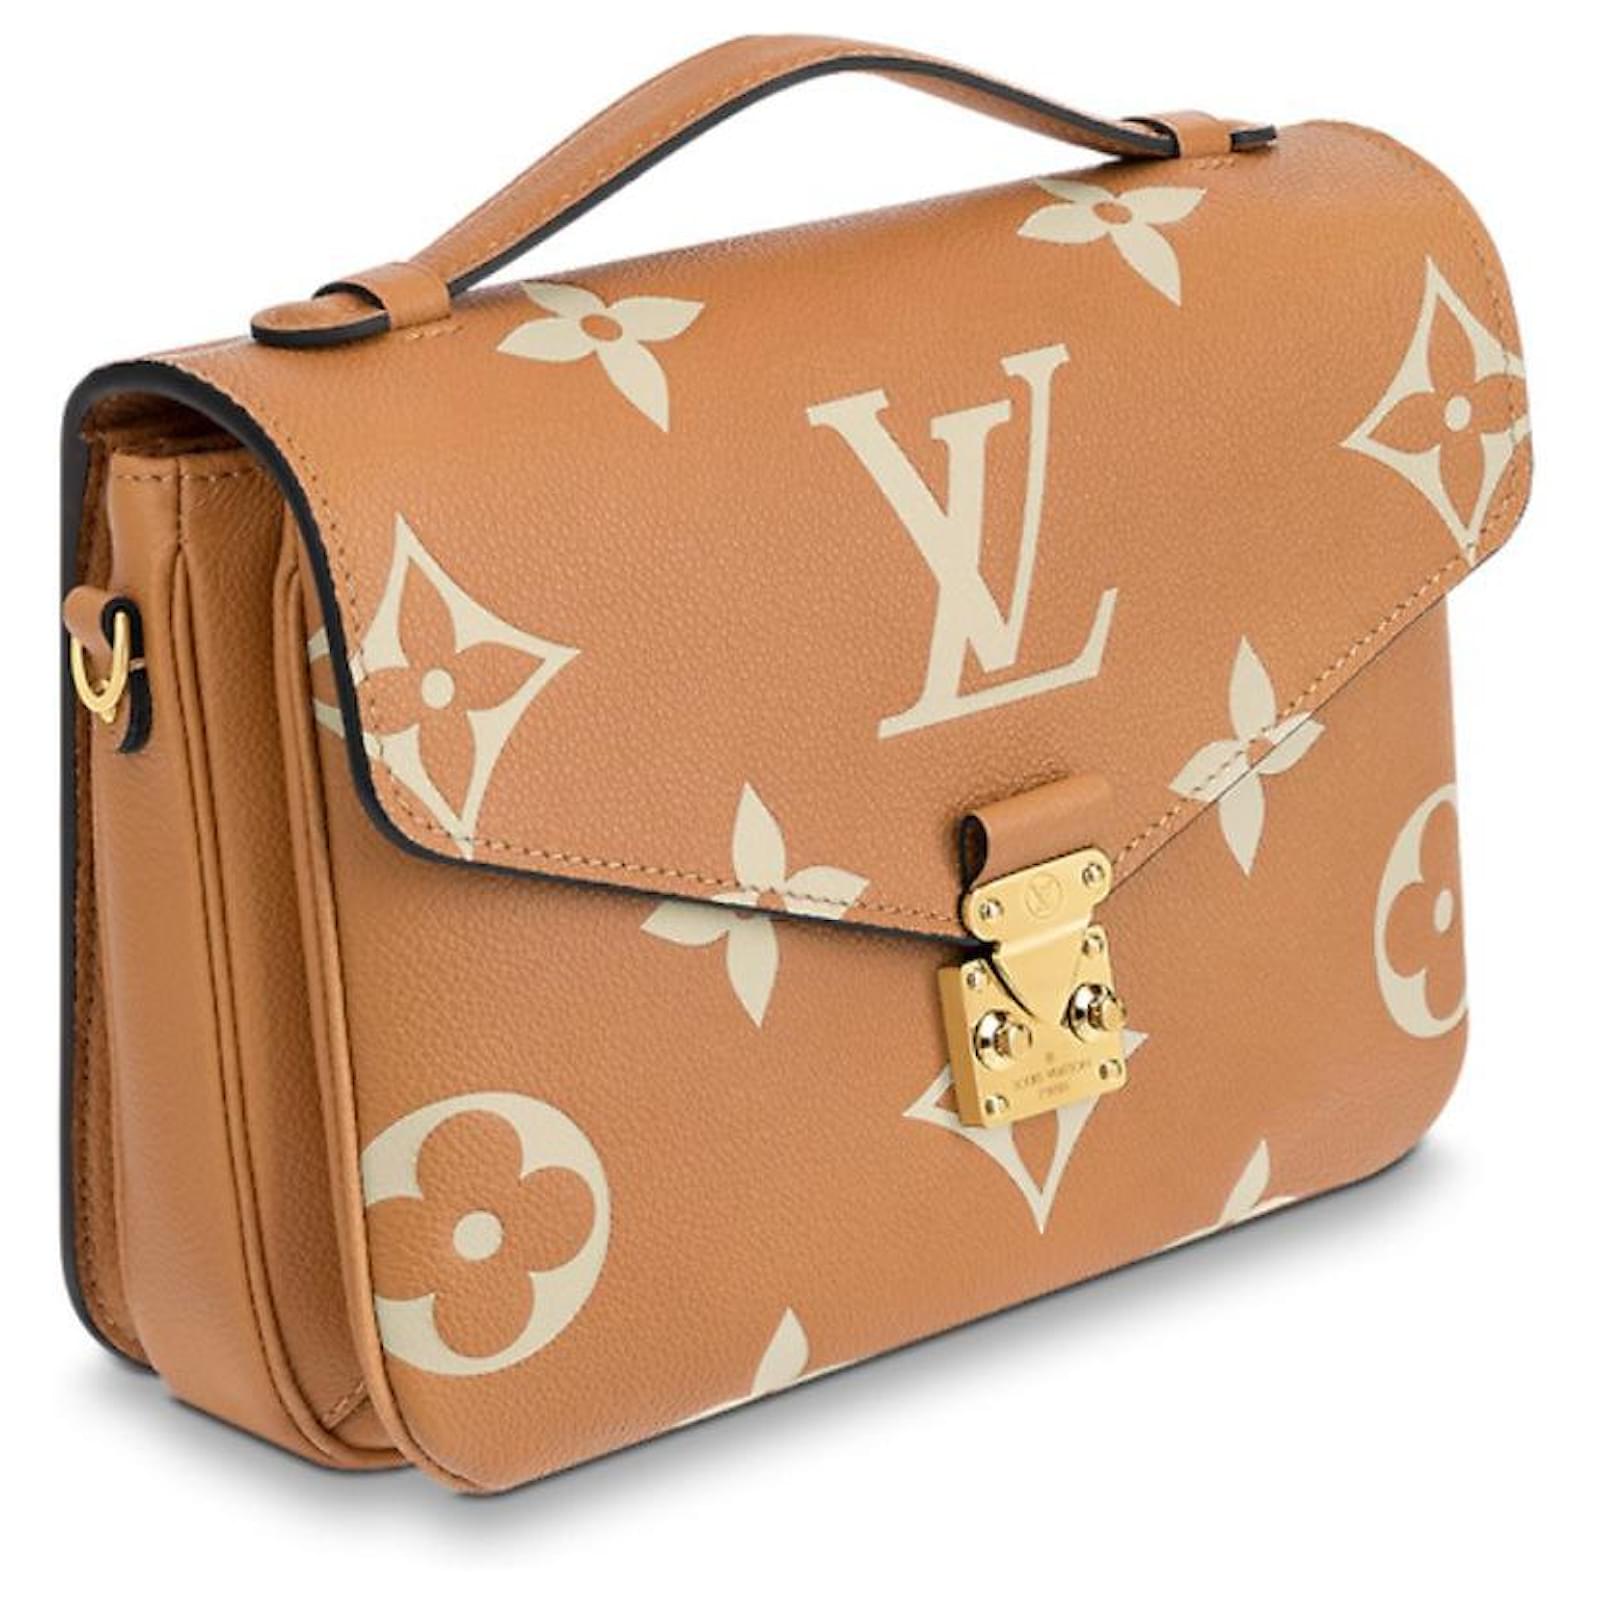 Metis leather clutch bag Louis Vuitton Beige in Leather - 35509224